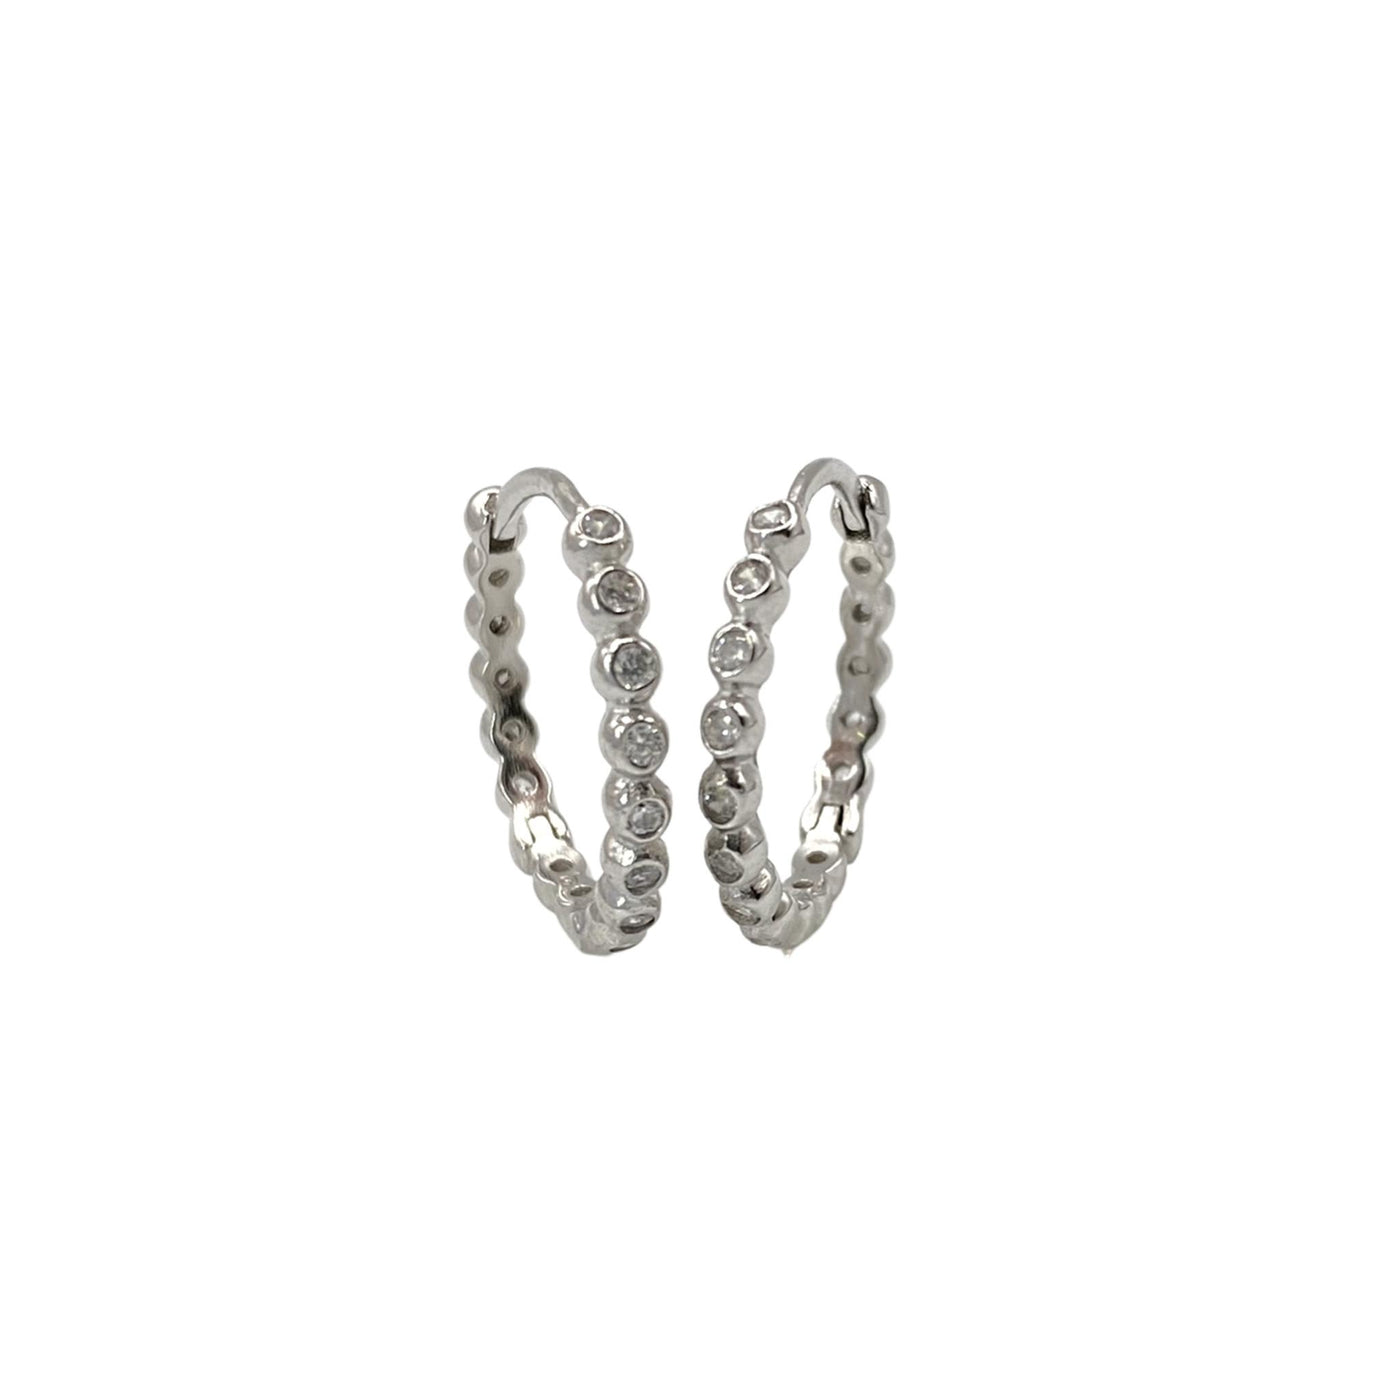 Silver earrings with white zirconia - 18 mm